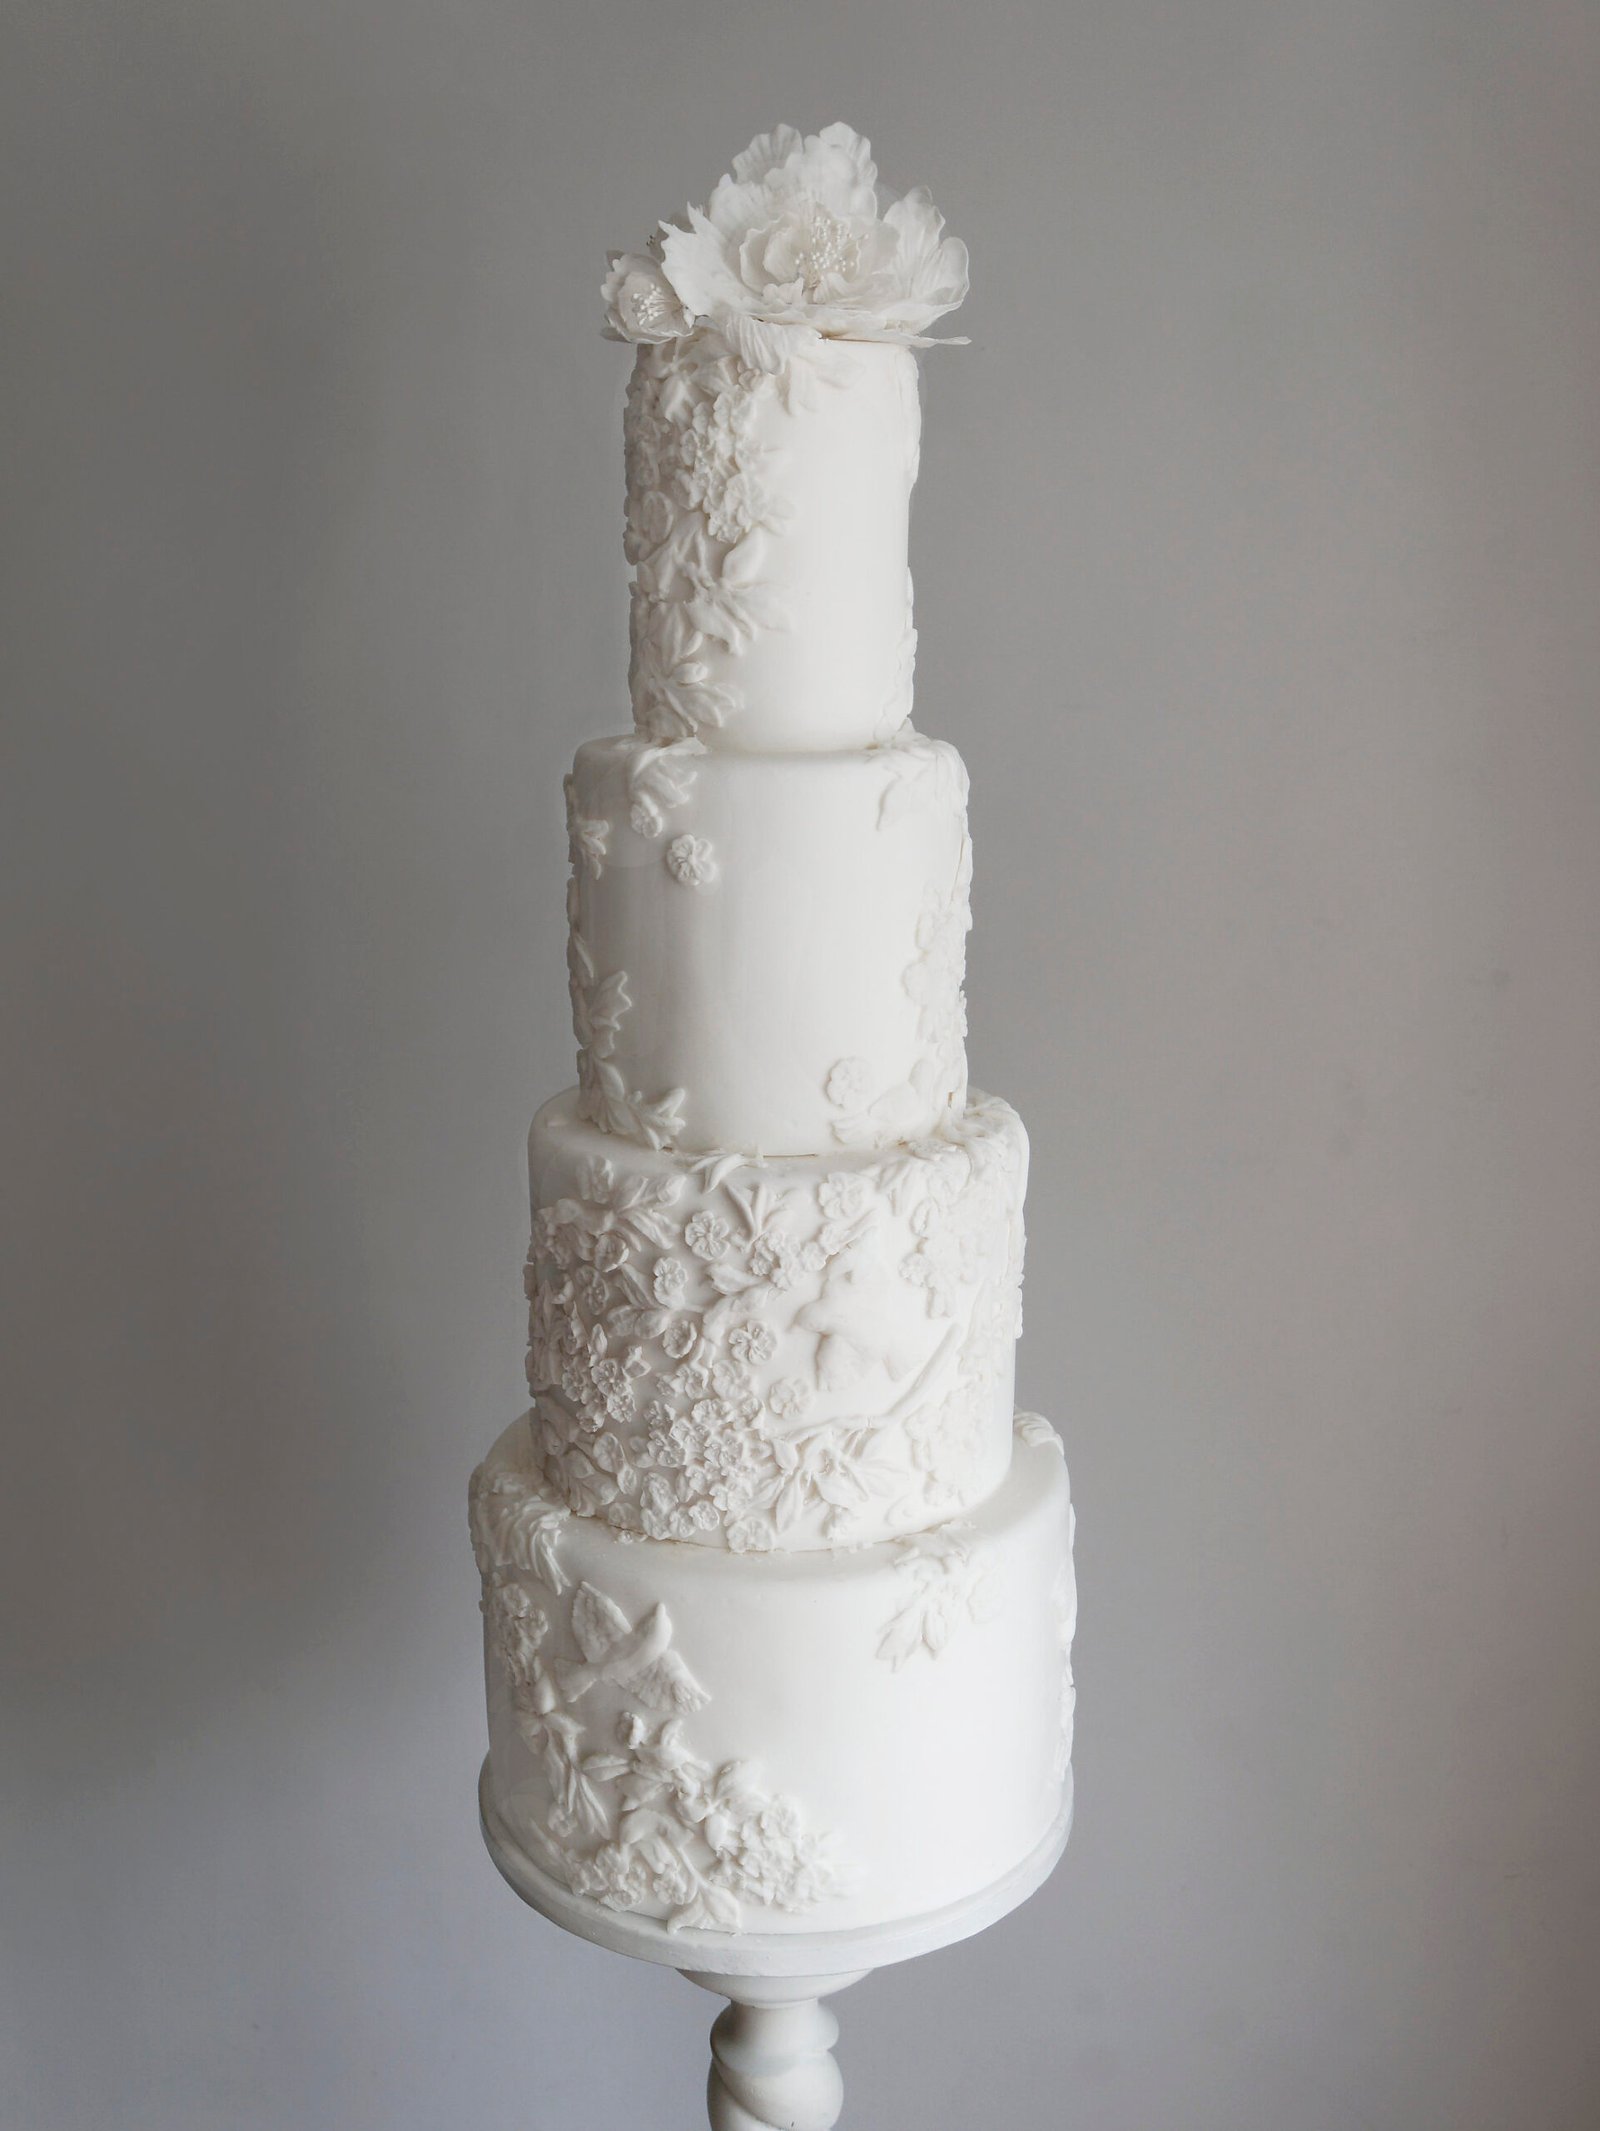 White bas relief wedding cake with flowers and birds